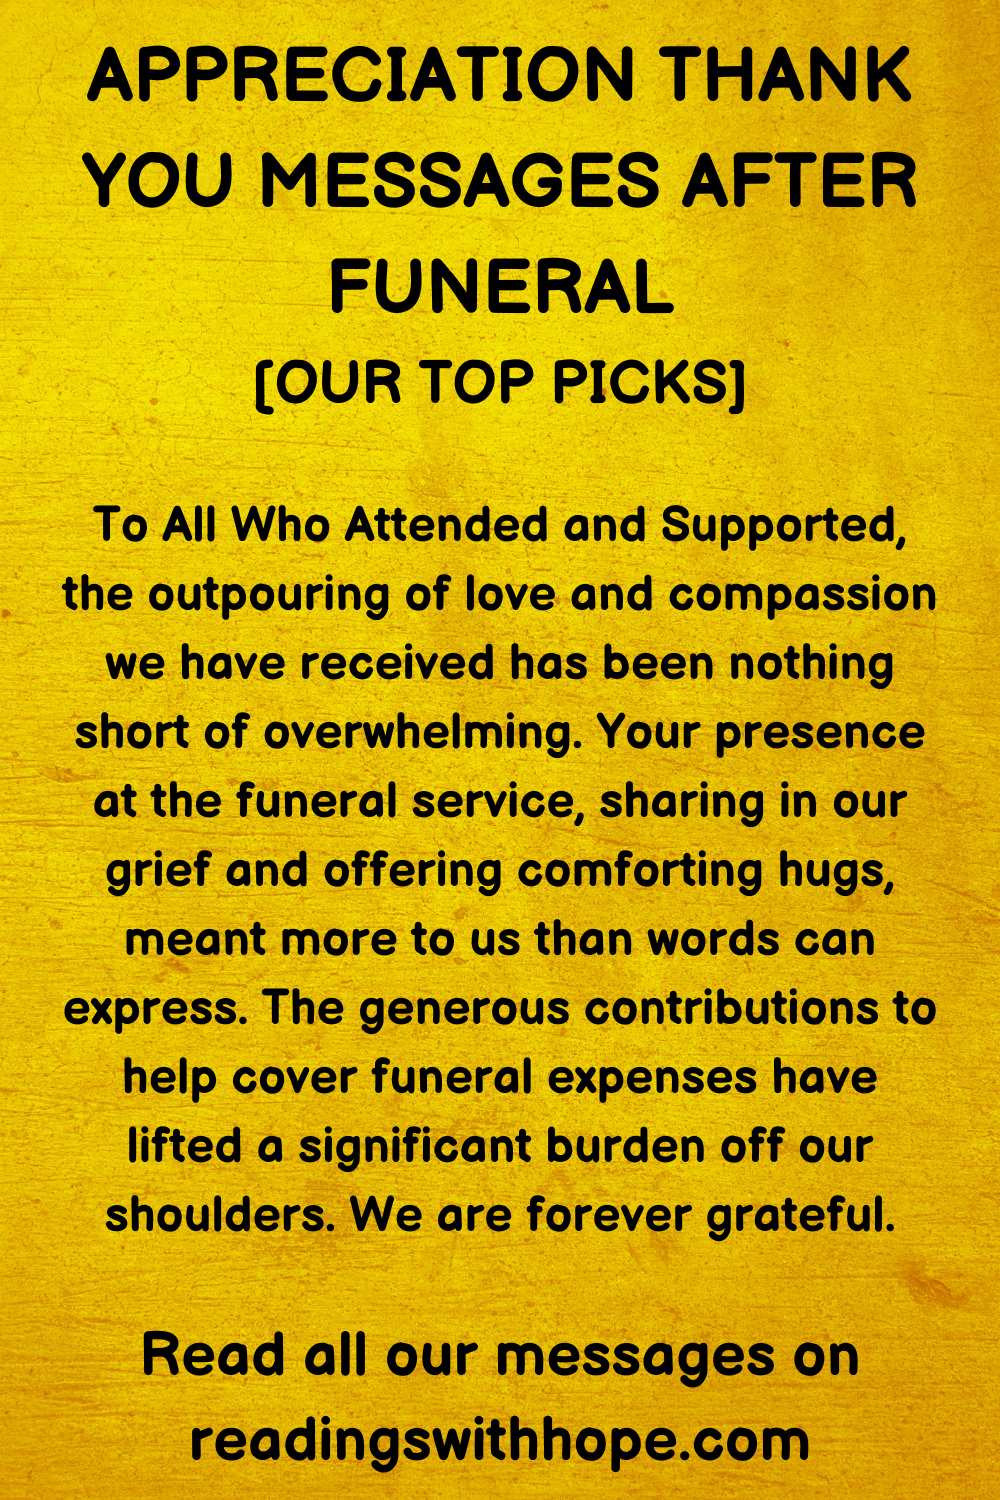 Appreciation Thank You Message After Funeral